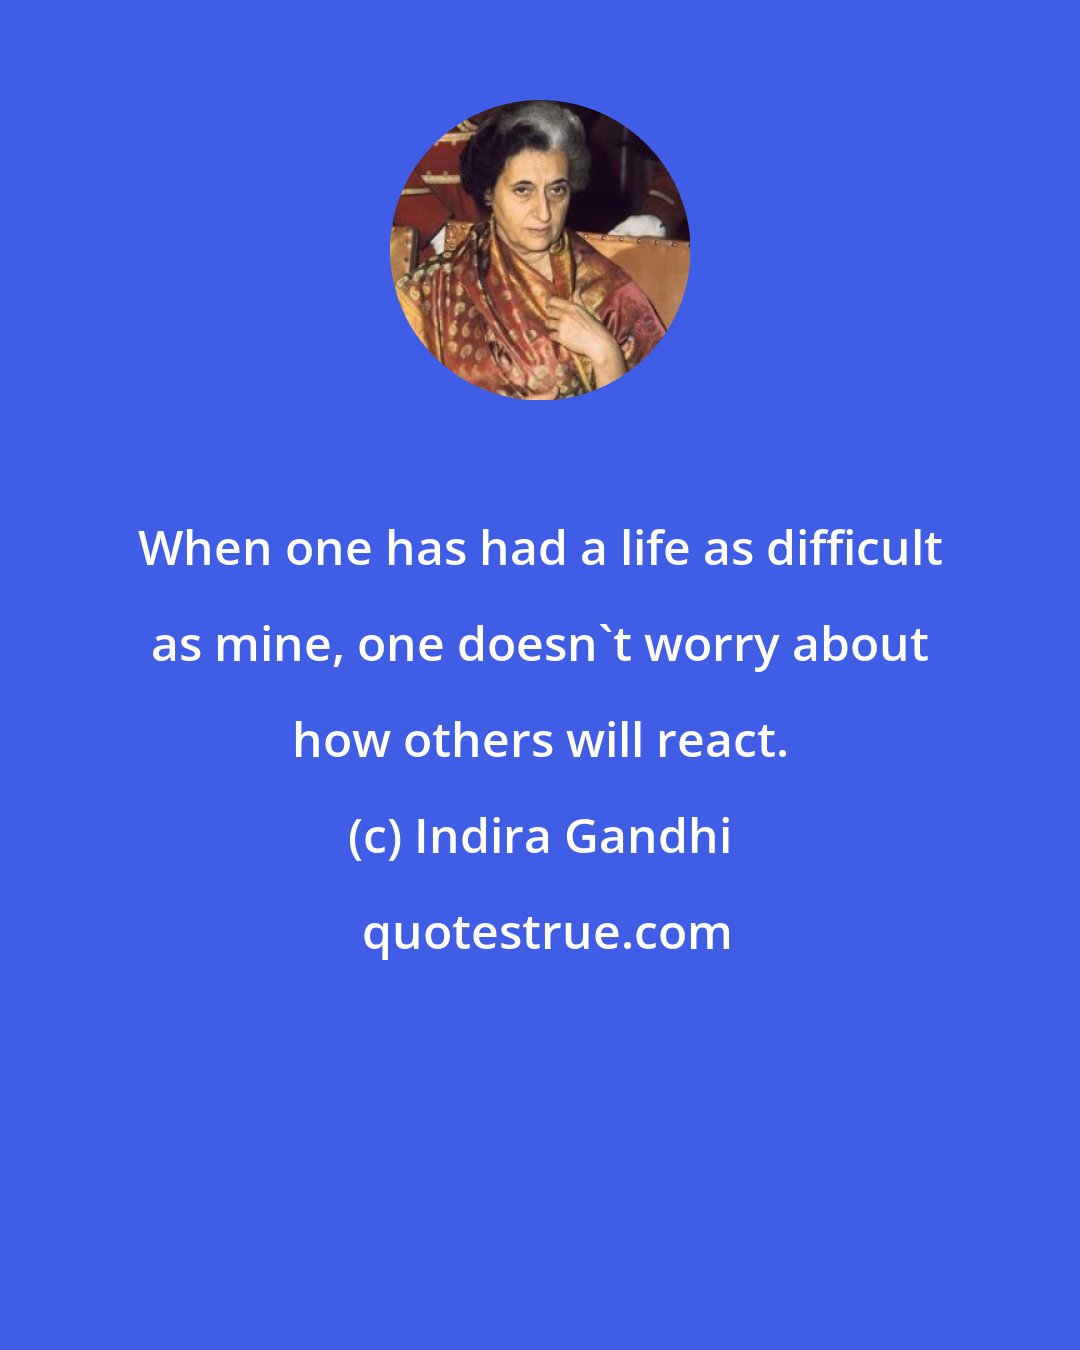 Indira Gandhi: When one has had a life as difficult as mine, one doesn't worry about how others will react.